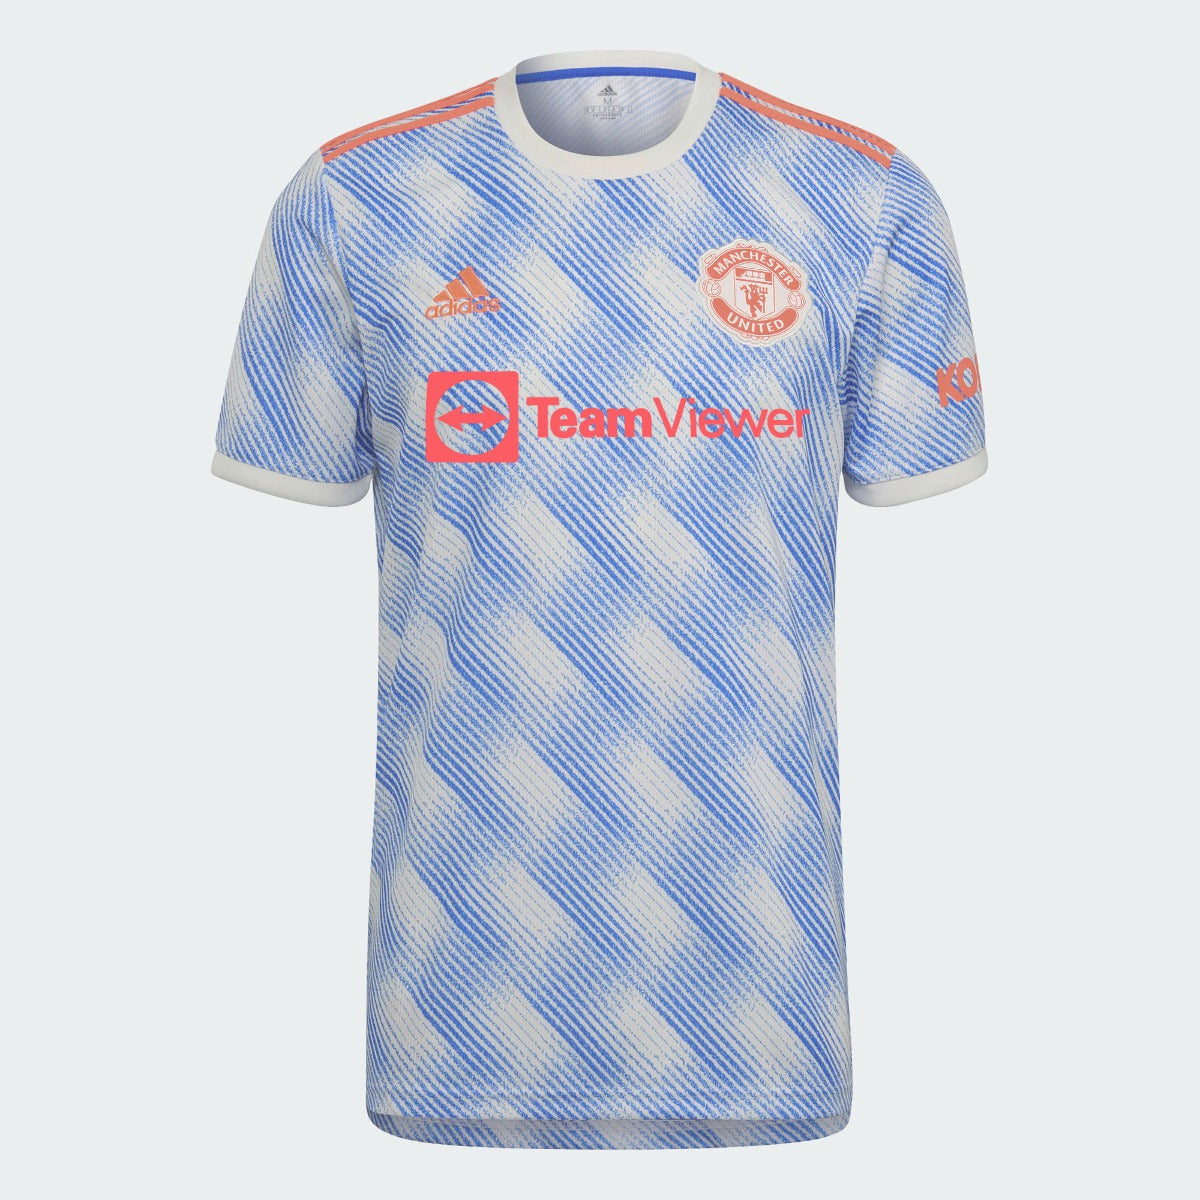 Adidas 2021-22 Manchester United Away Jersey - White-Royal (Front)